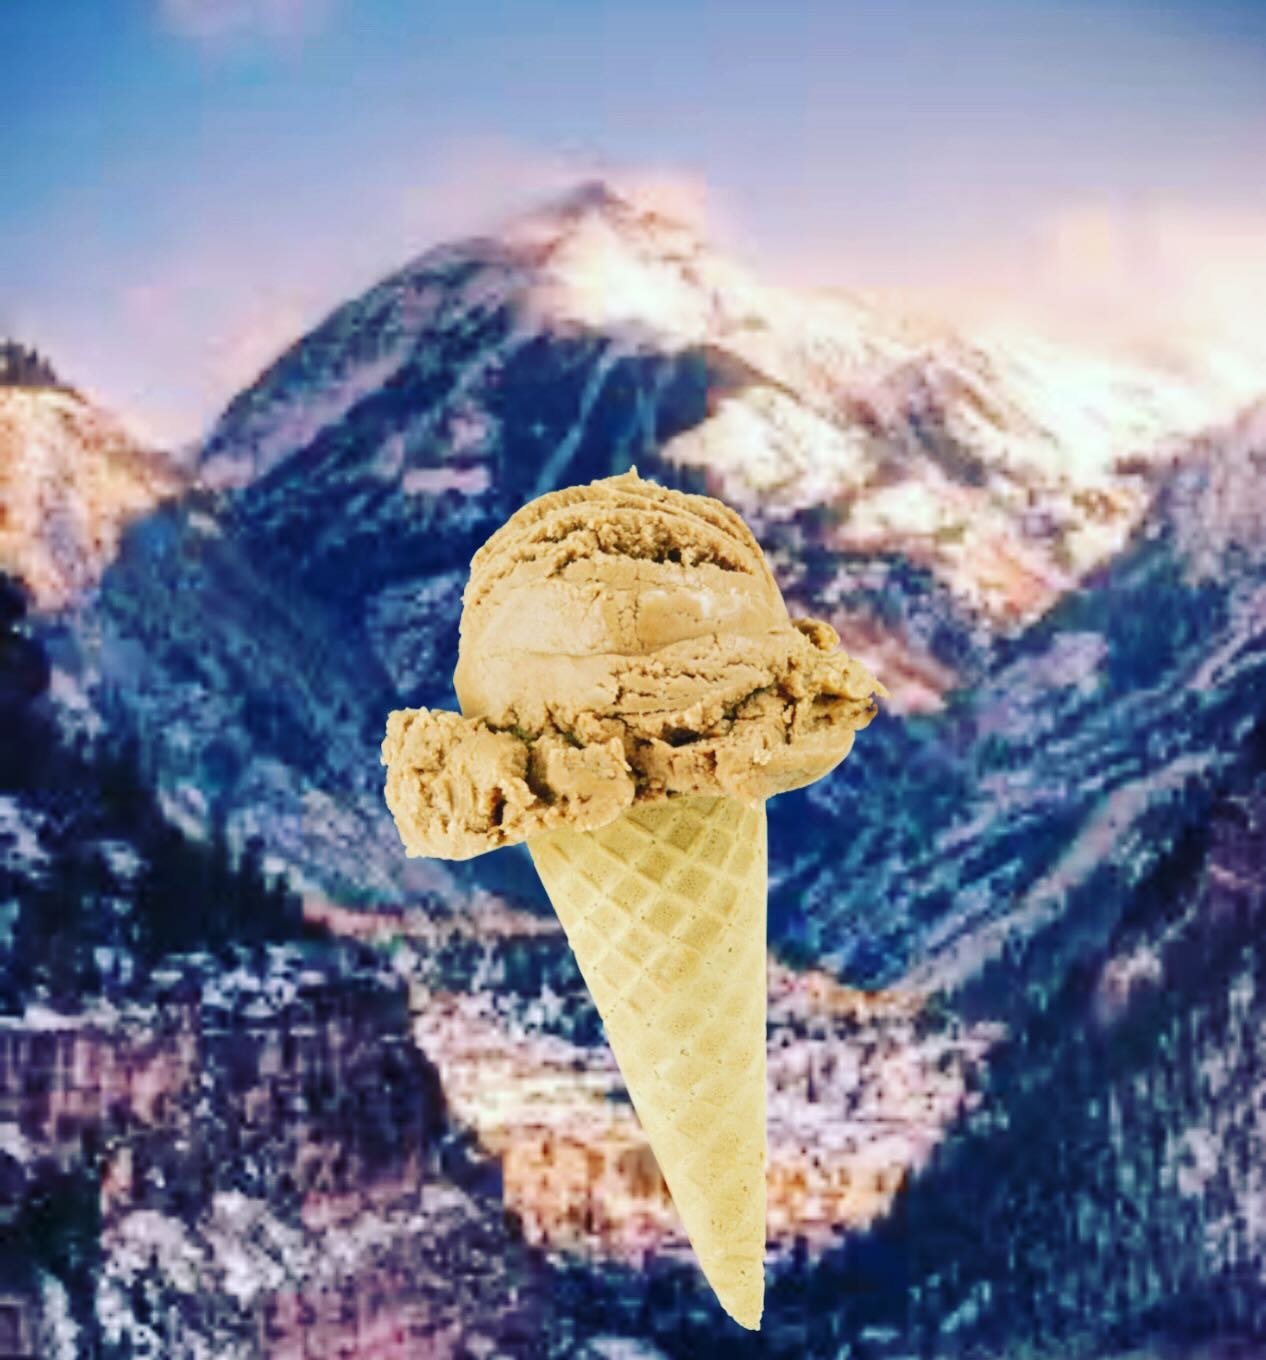 Third Bowl Homemade Ice Cream is now in Ouray!  We are so proud to partner with @ourayicehouse in downtown Ouray who carries Third Bowl in scoops, shakes, and prepackaged ice cream to go!  #homemadeicecream #madefromscratch #smallbatchicecream #north